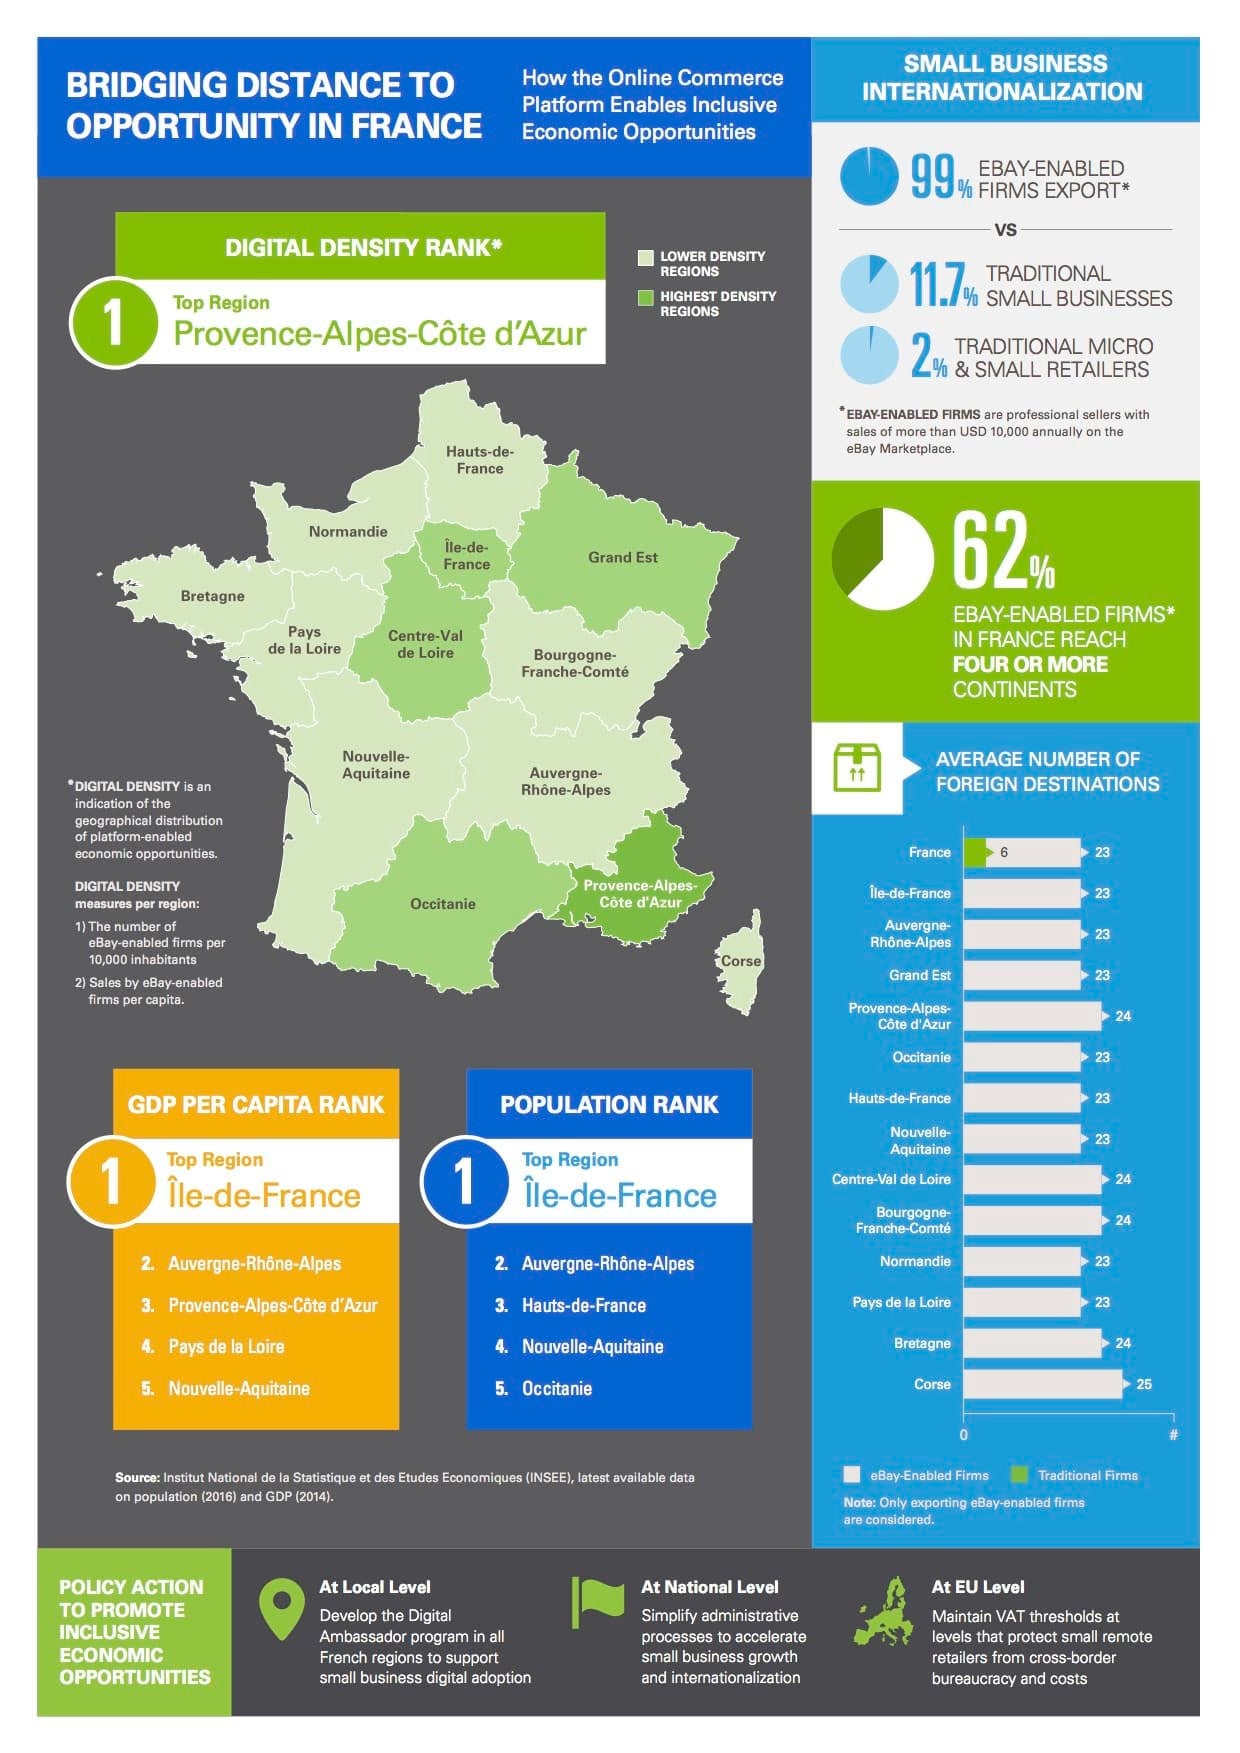 An infographic about how online commerce enables inclusive economic opportunities to France